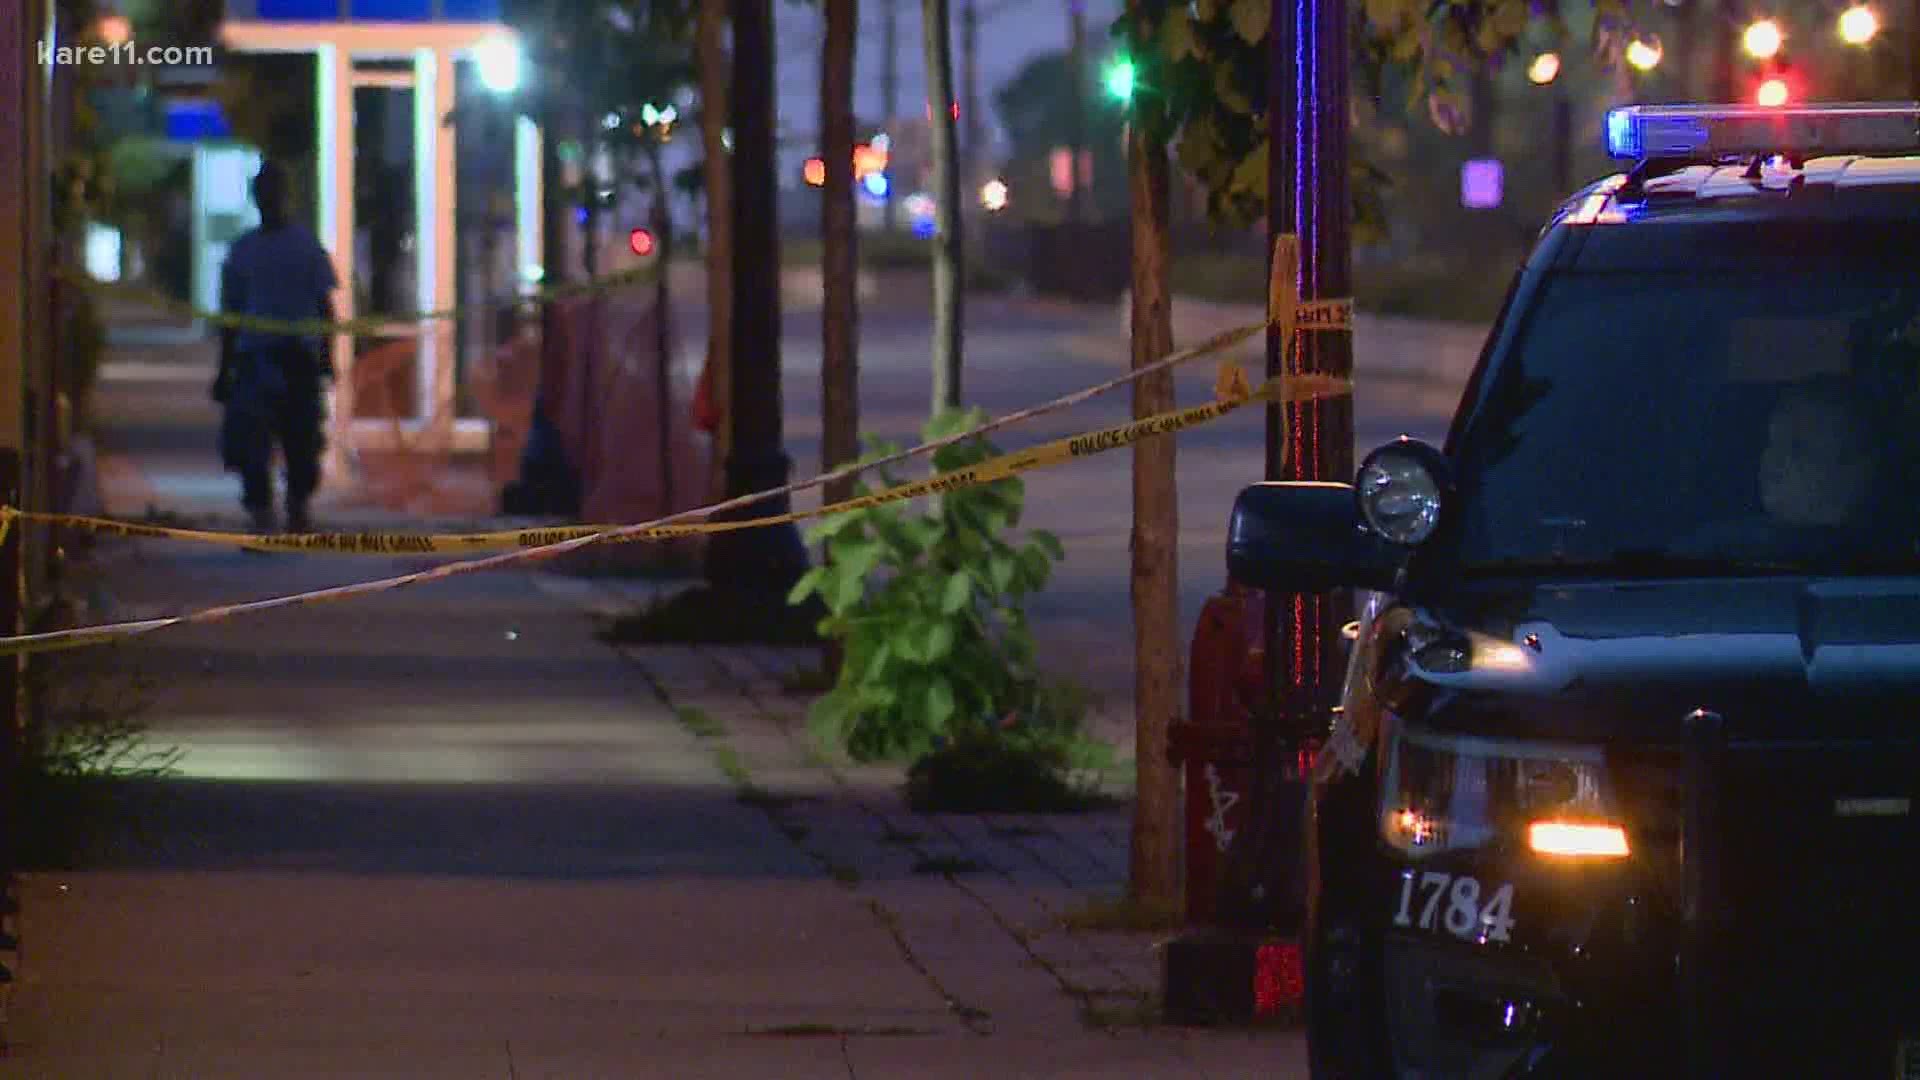 A woman is dead after being fatally shot during a disturbance near a bar in St. Paul's Midway neighborhood overnight.